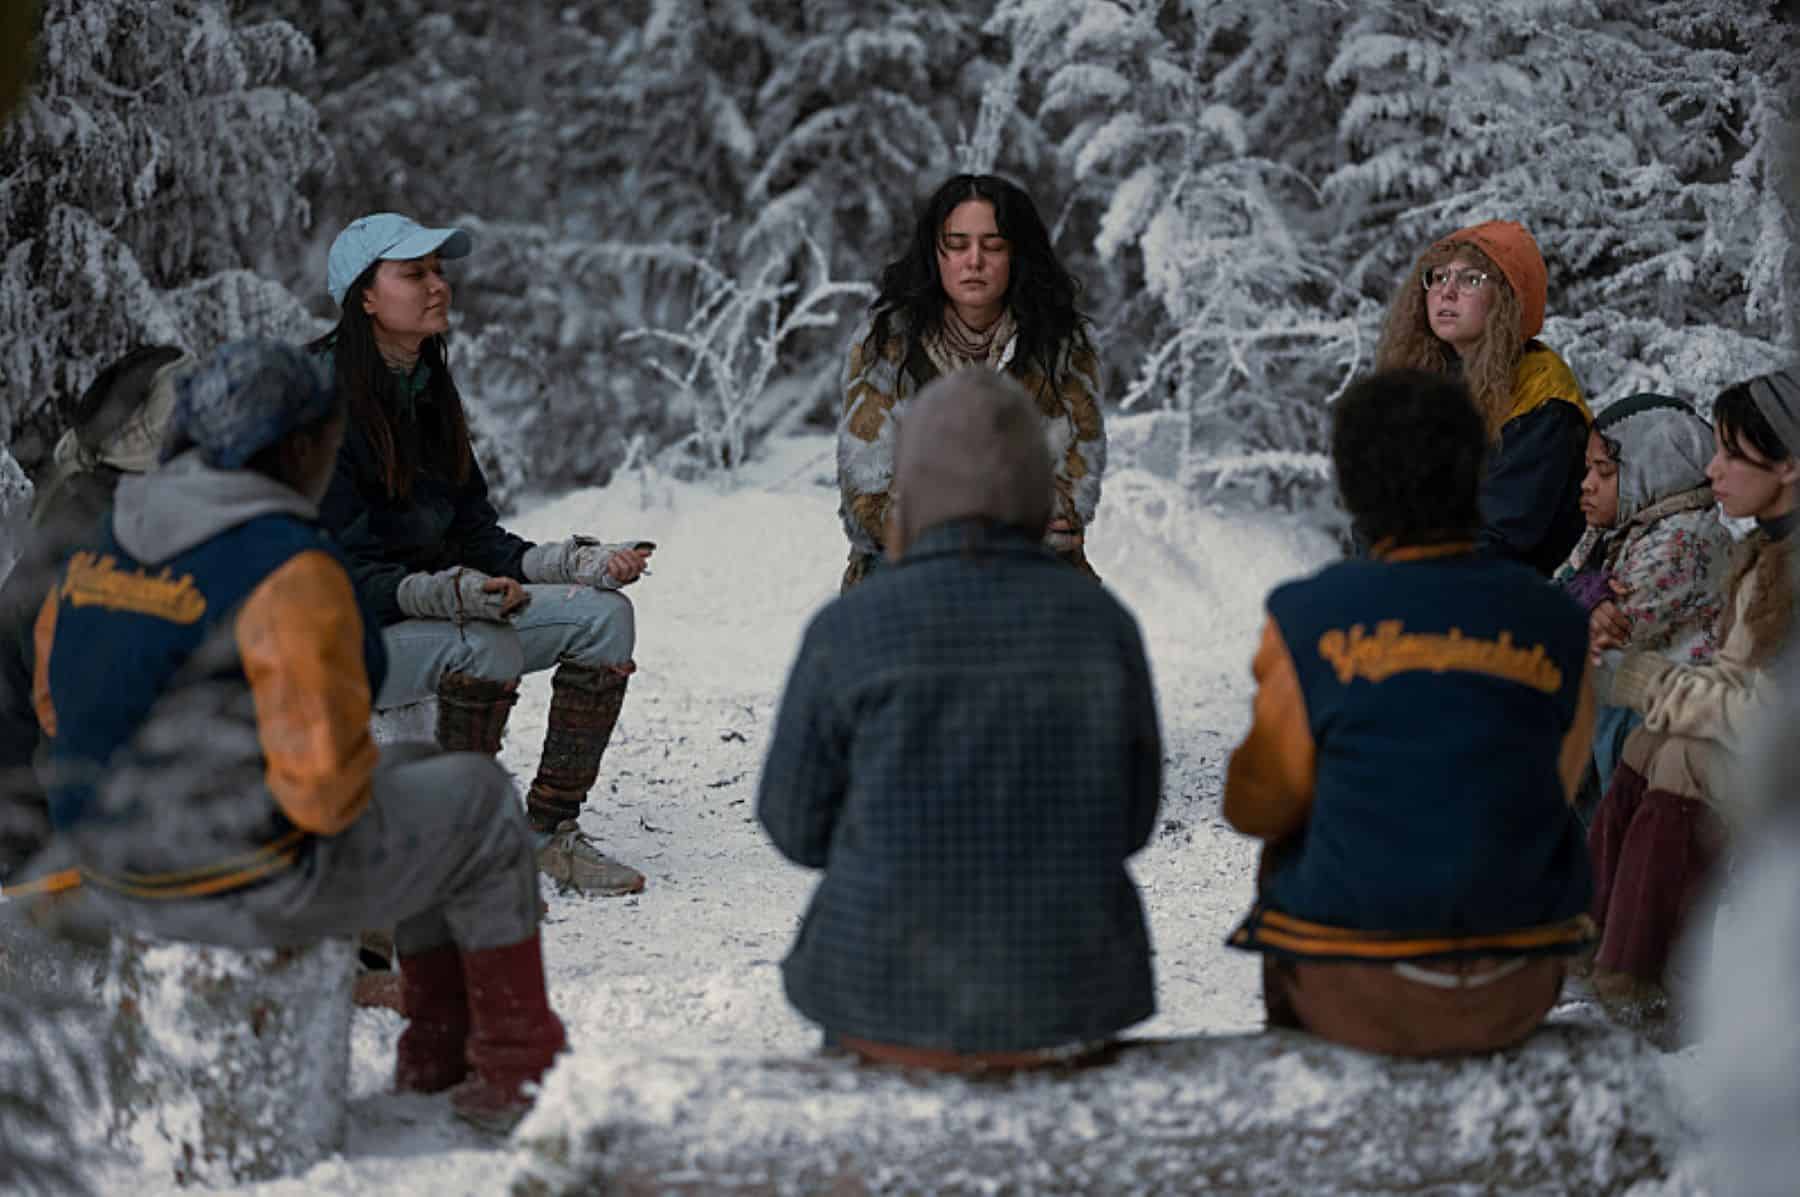 A group of teenage girls sit outside in a prayer circle in this photo by Showtime.